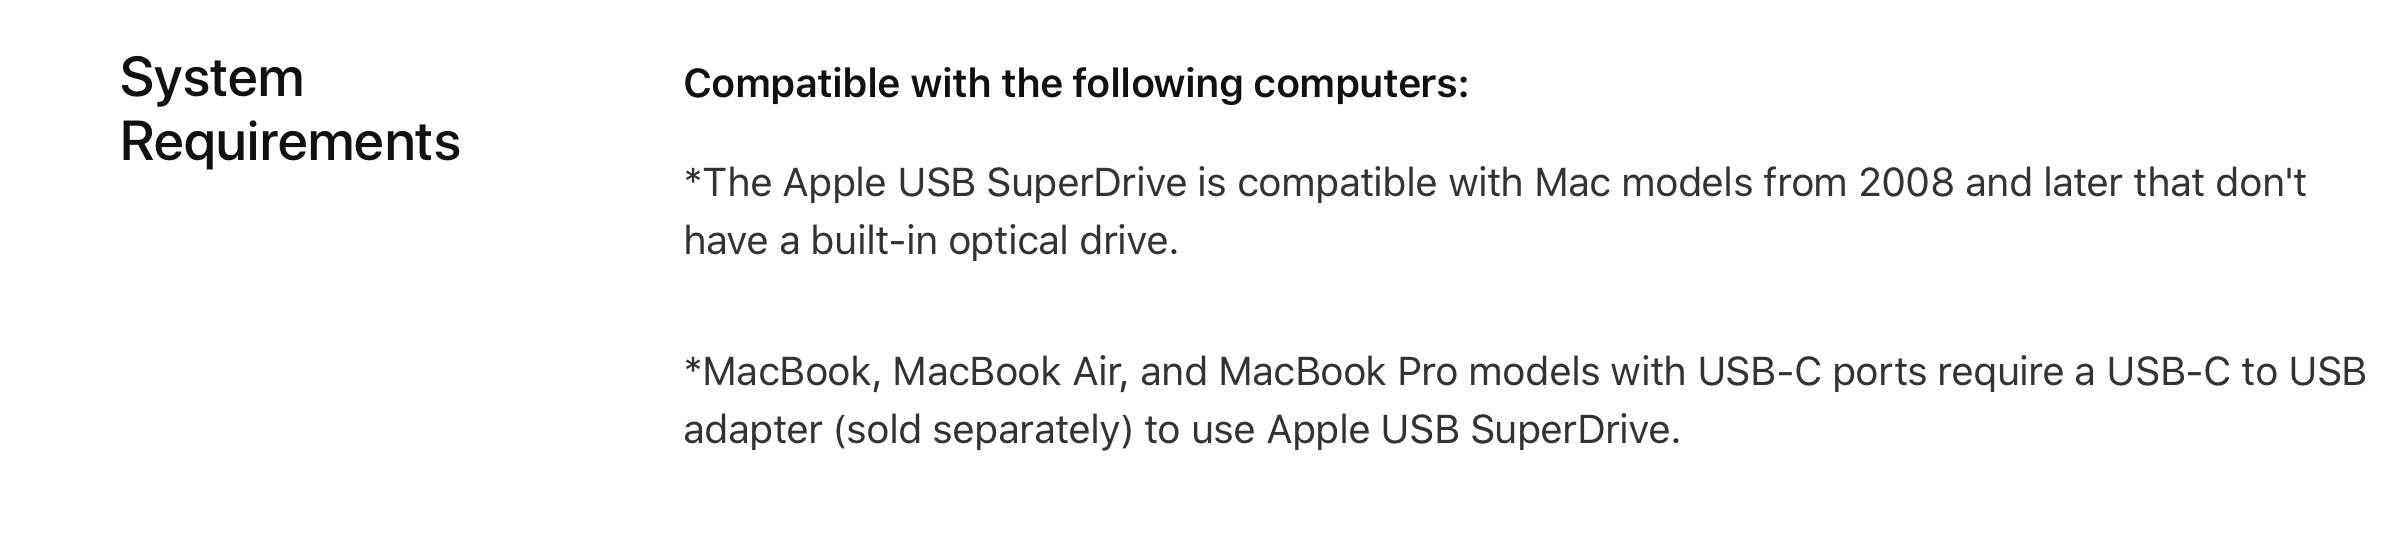 apple usb superdrive not supported on macbook pro